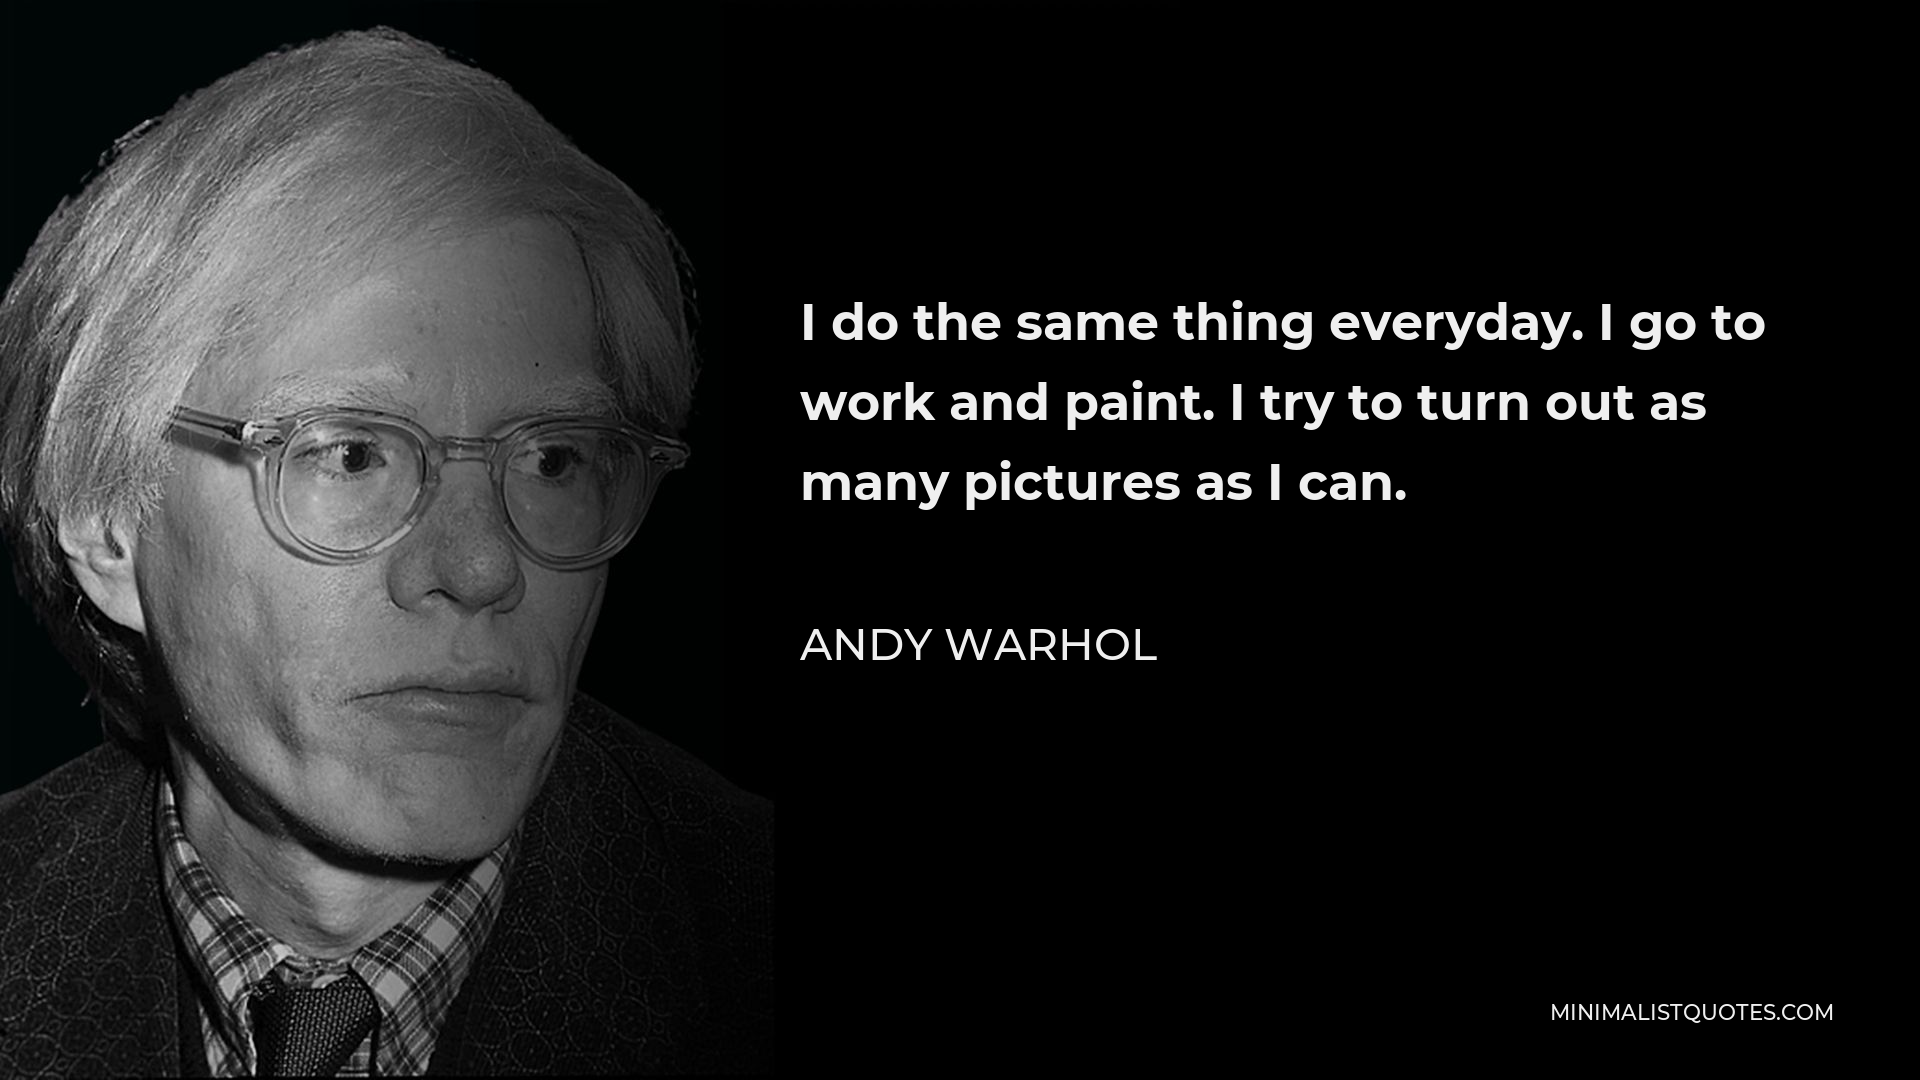 Andy Warhol Quote - I do the same thing everyday. I go to work and paint. I try to turn out as many pictures as I can.